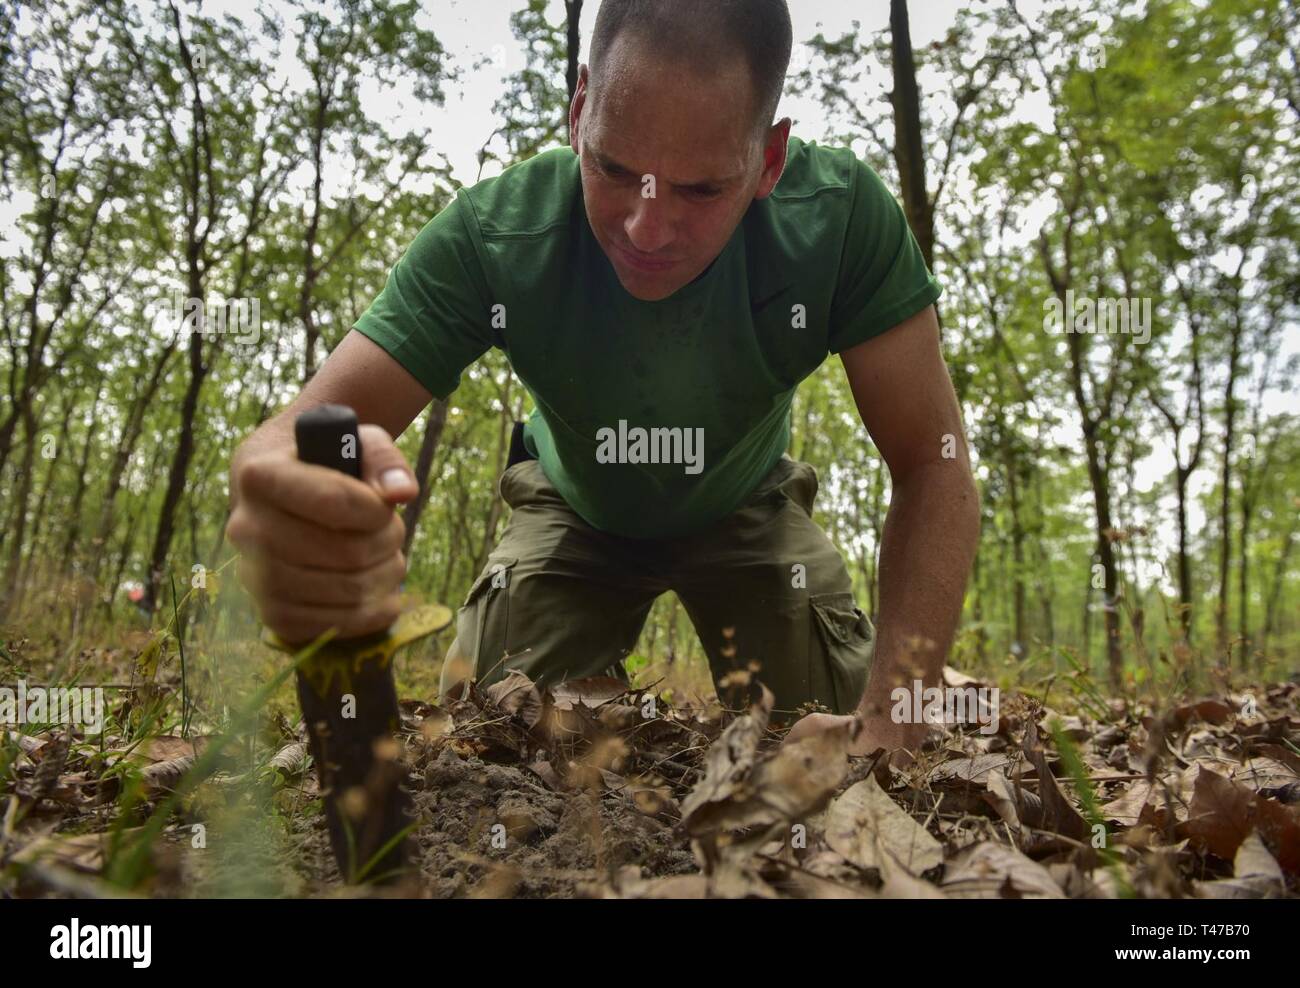 U.S. Army Capt. Jeramy Mahoney, medic with the Defense POW/MIA Accounting Agency (DPAA), digs for a piece of metal that was detected during a sweep of a rubber tree plantation in Binh Duong, Socialist Republic of Vietnam, March 11, 2019. During the 35-day mission, the team investigated several sites correlated with missing service members in hopes of recommending future recovery operations. DPAA’s mission is to provide the fullest possible accounting of our missing personnel to their families and the nation. Stock Photo